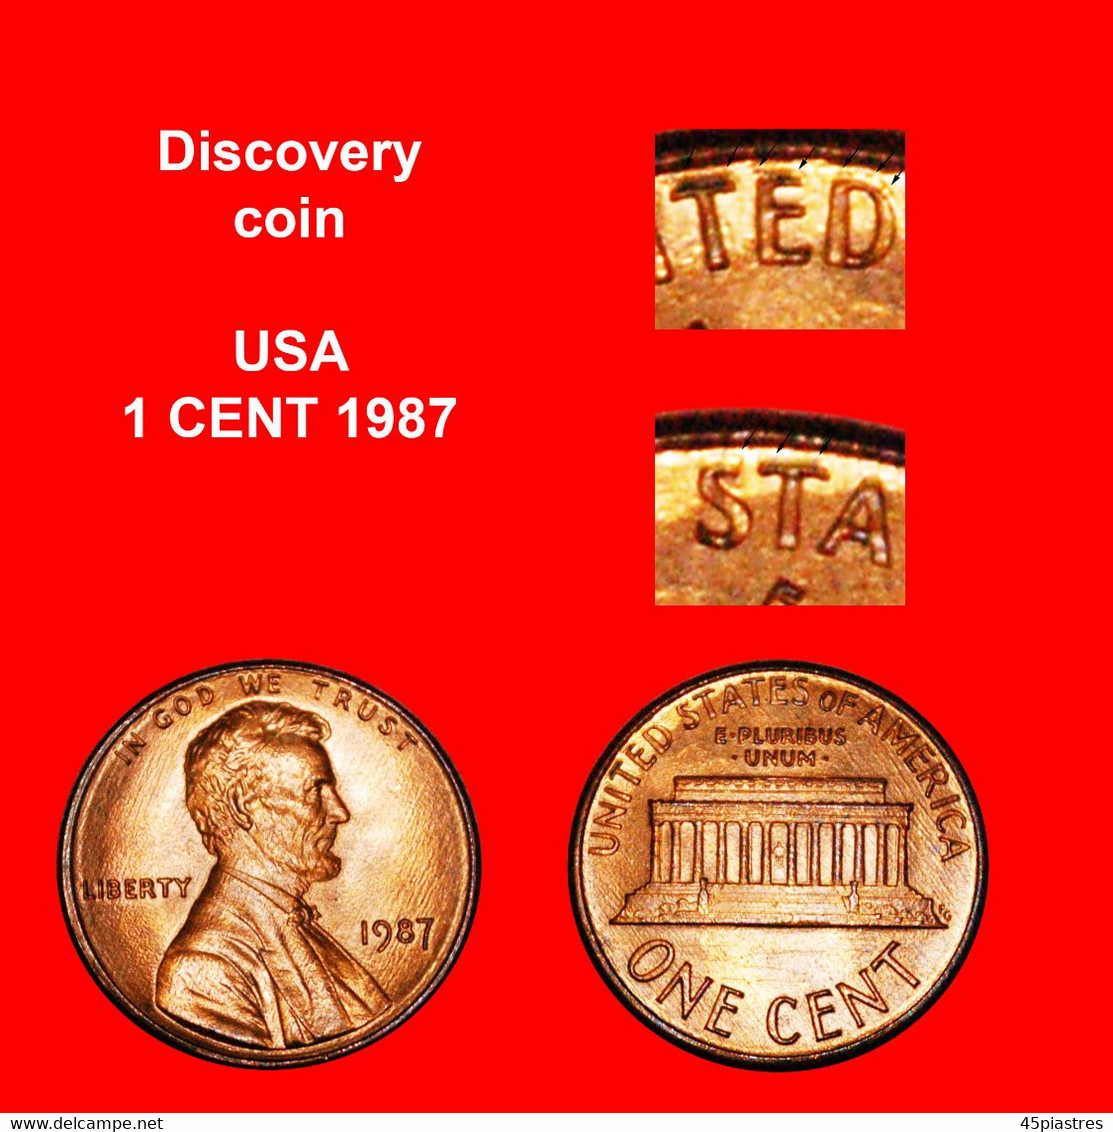 * MEMORIAL (1982-2008):USA1 CENT 1987 UNC MINT LUSTRE DISCOVERY COIN UNPUBLSIHEDLINCOLN 1809-1865LOW STARTNO RESERVE - Errors